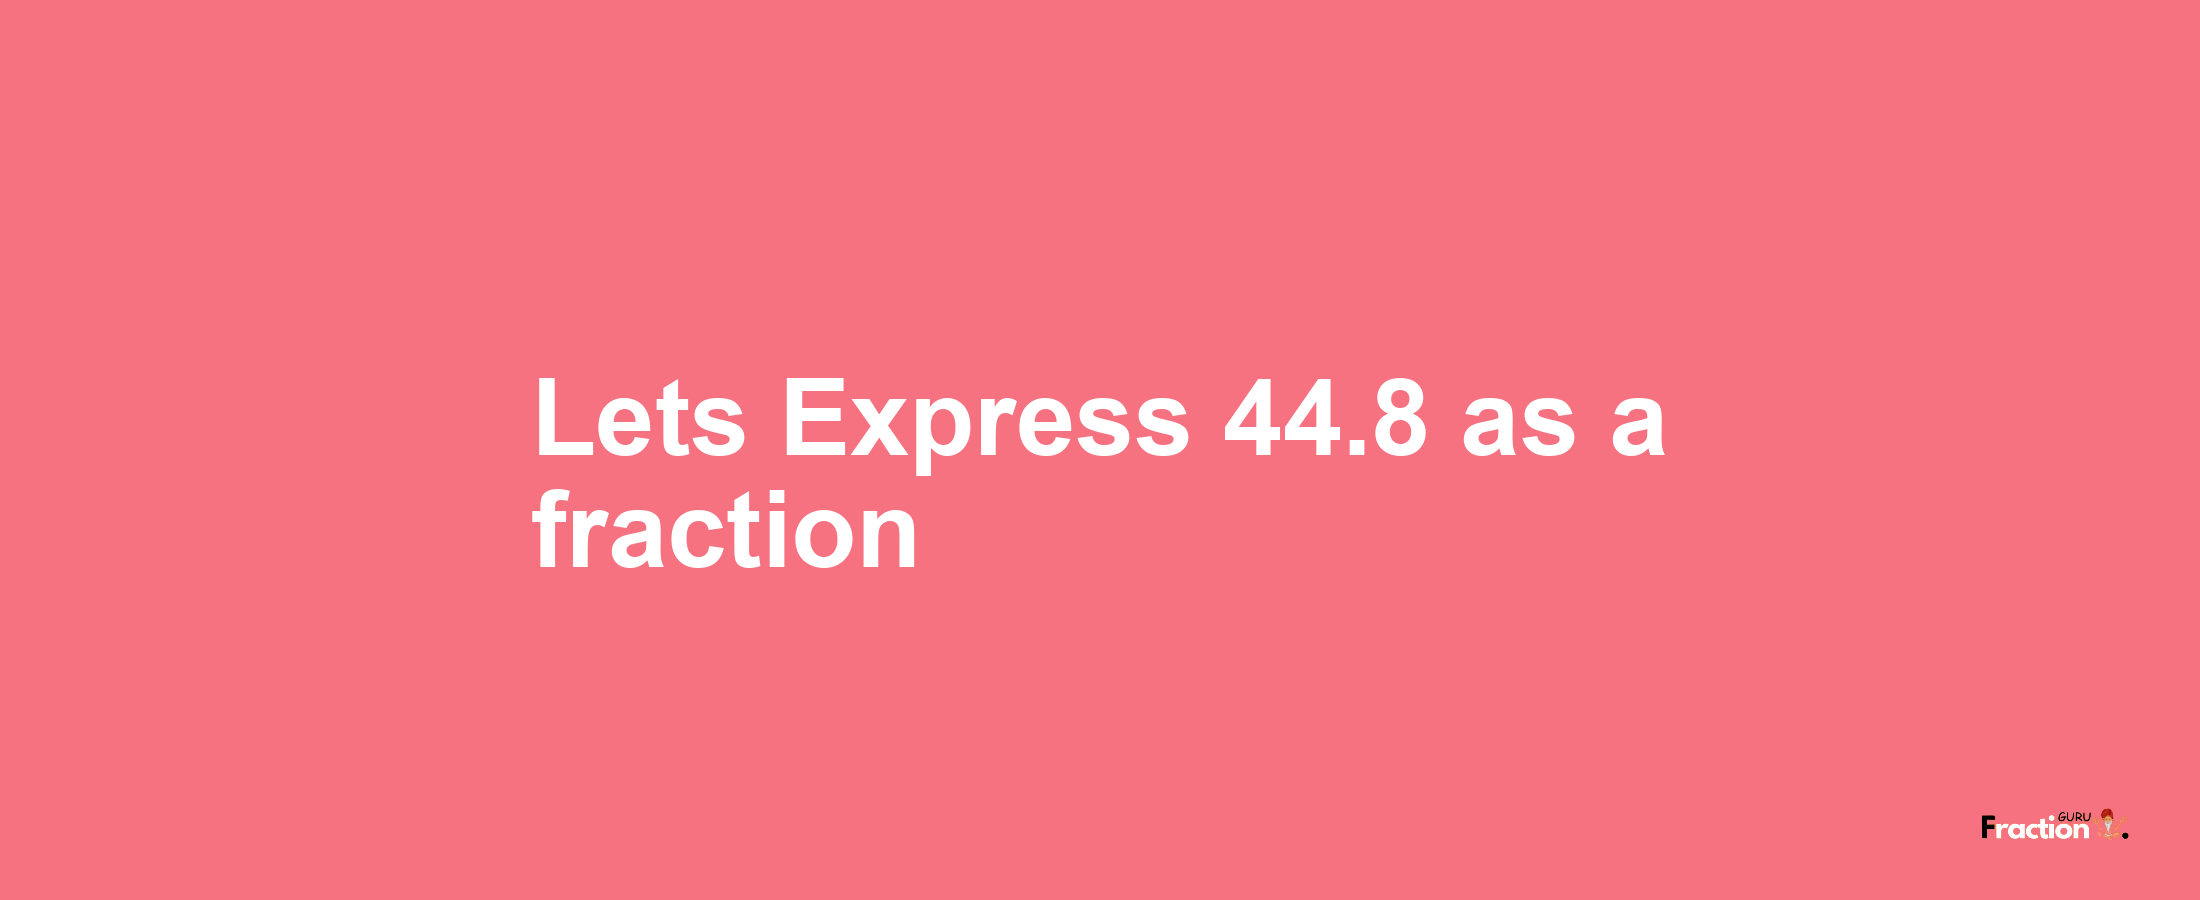 Lets Express 44.8 as afraction